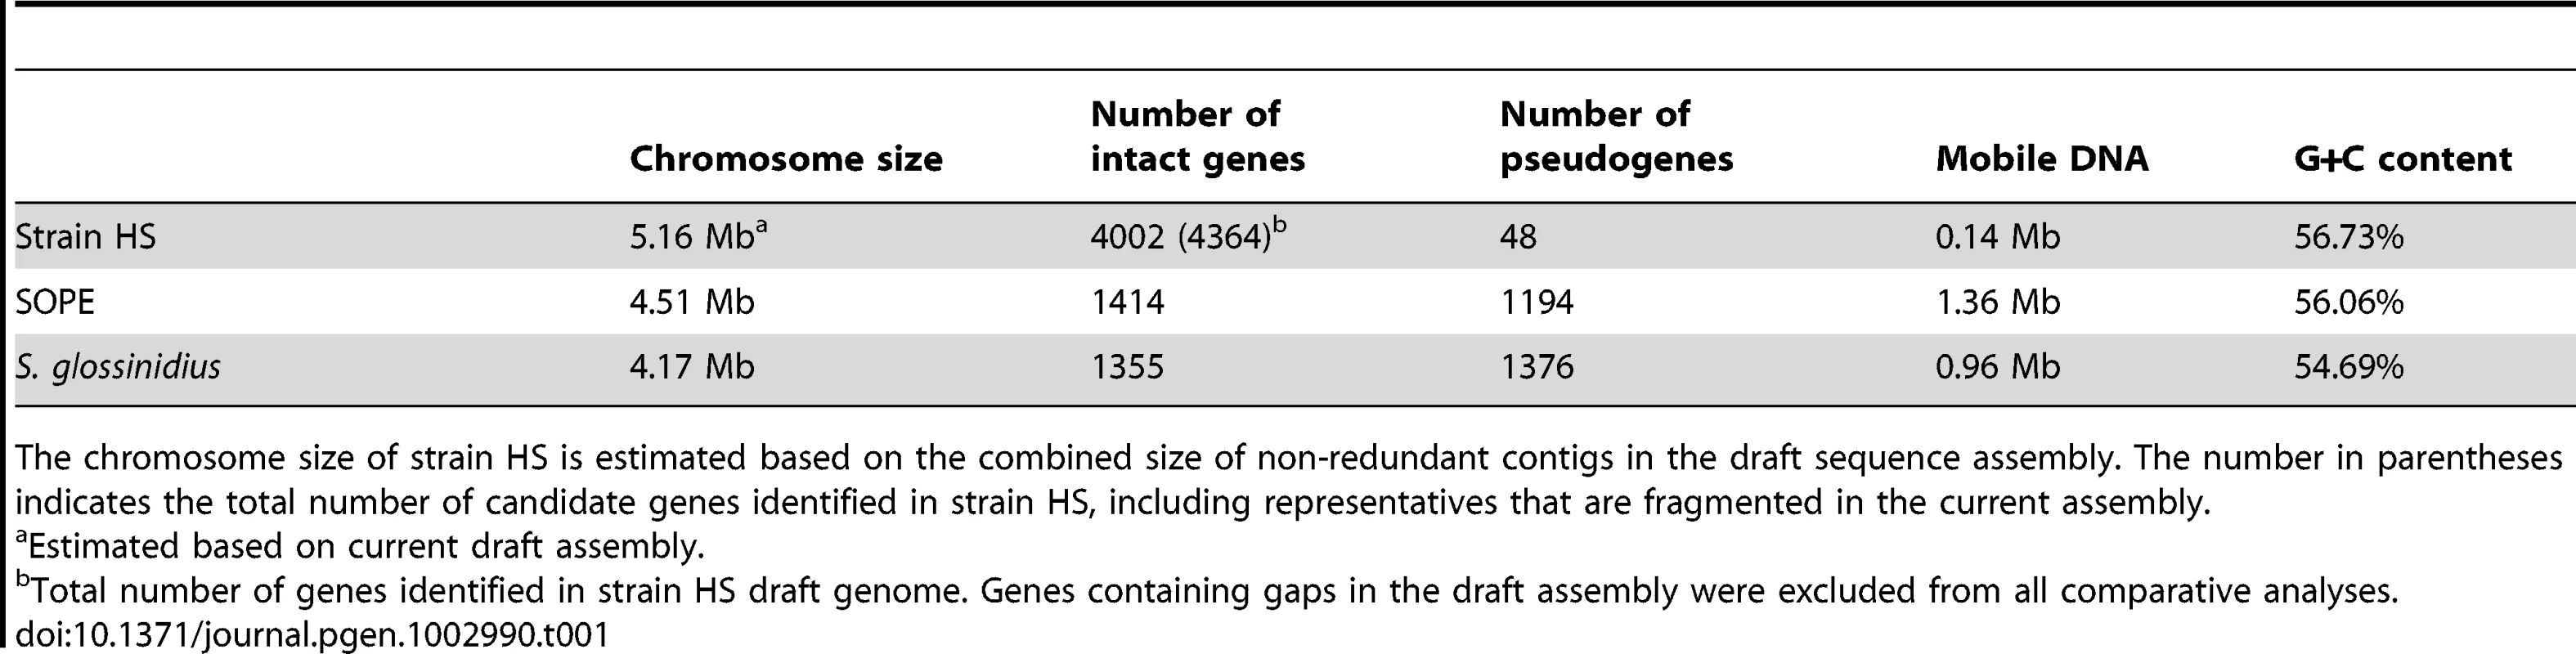 General features of the strain HS, SOPE, and <i>S. glossinidius</i> genome sequences.